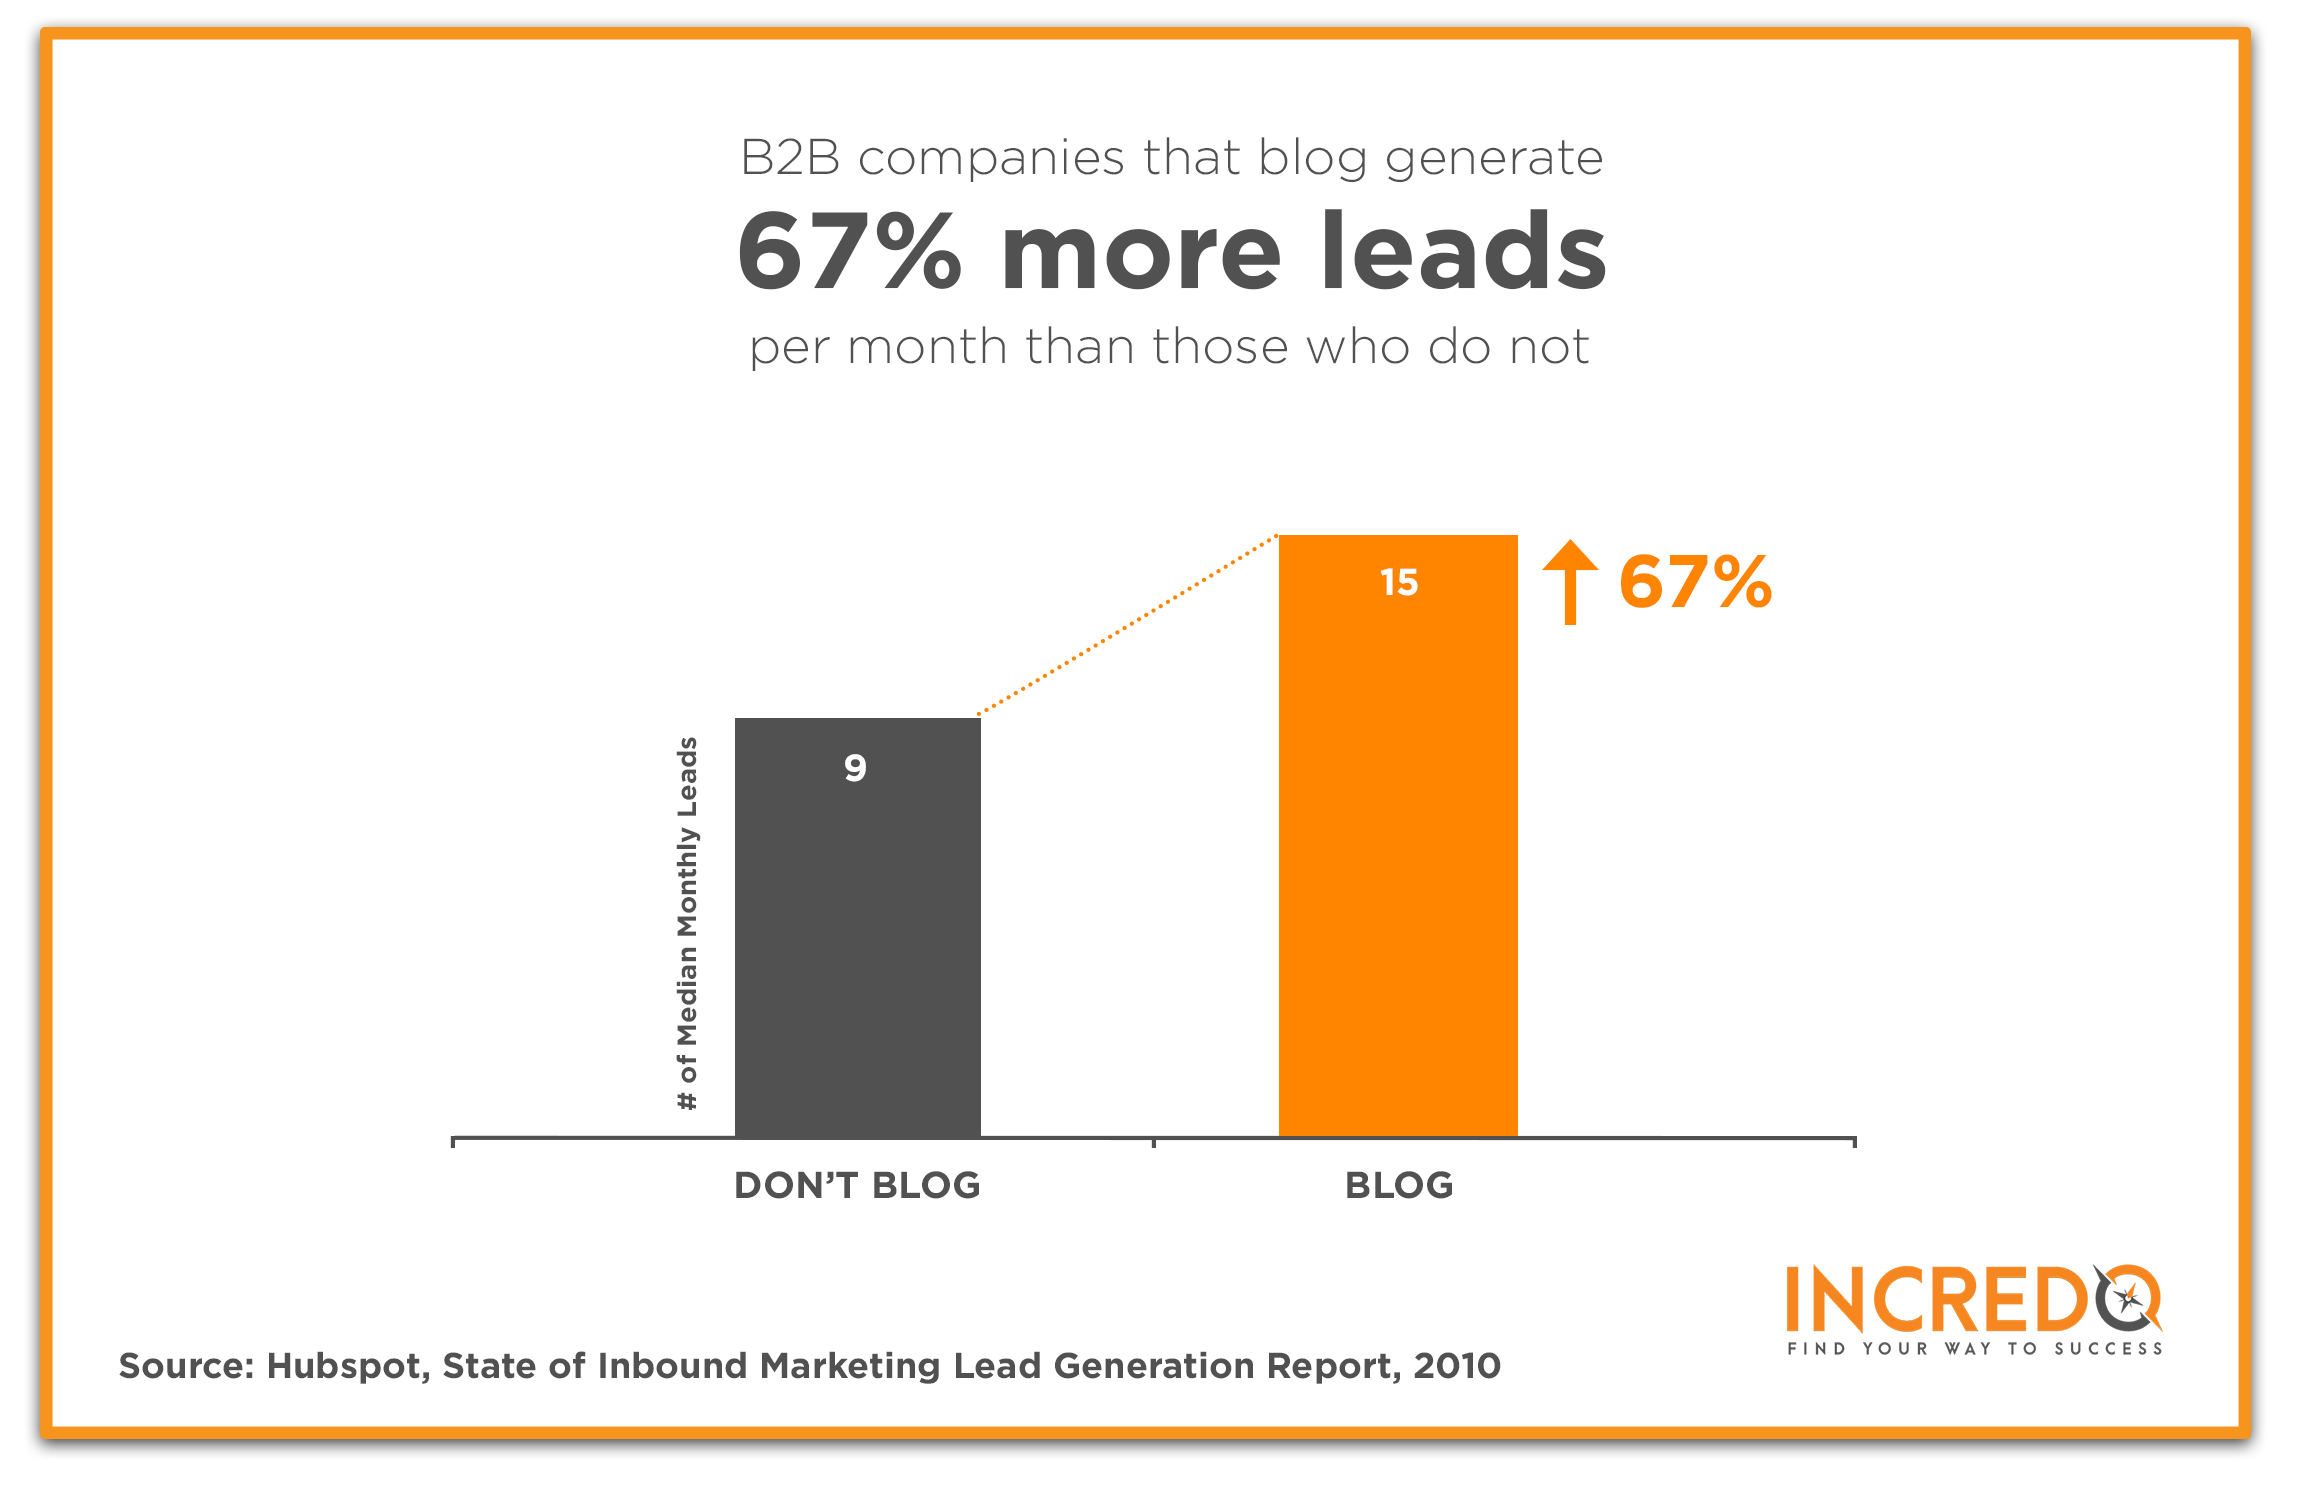 B2B companies that blog generate more leads